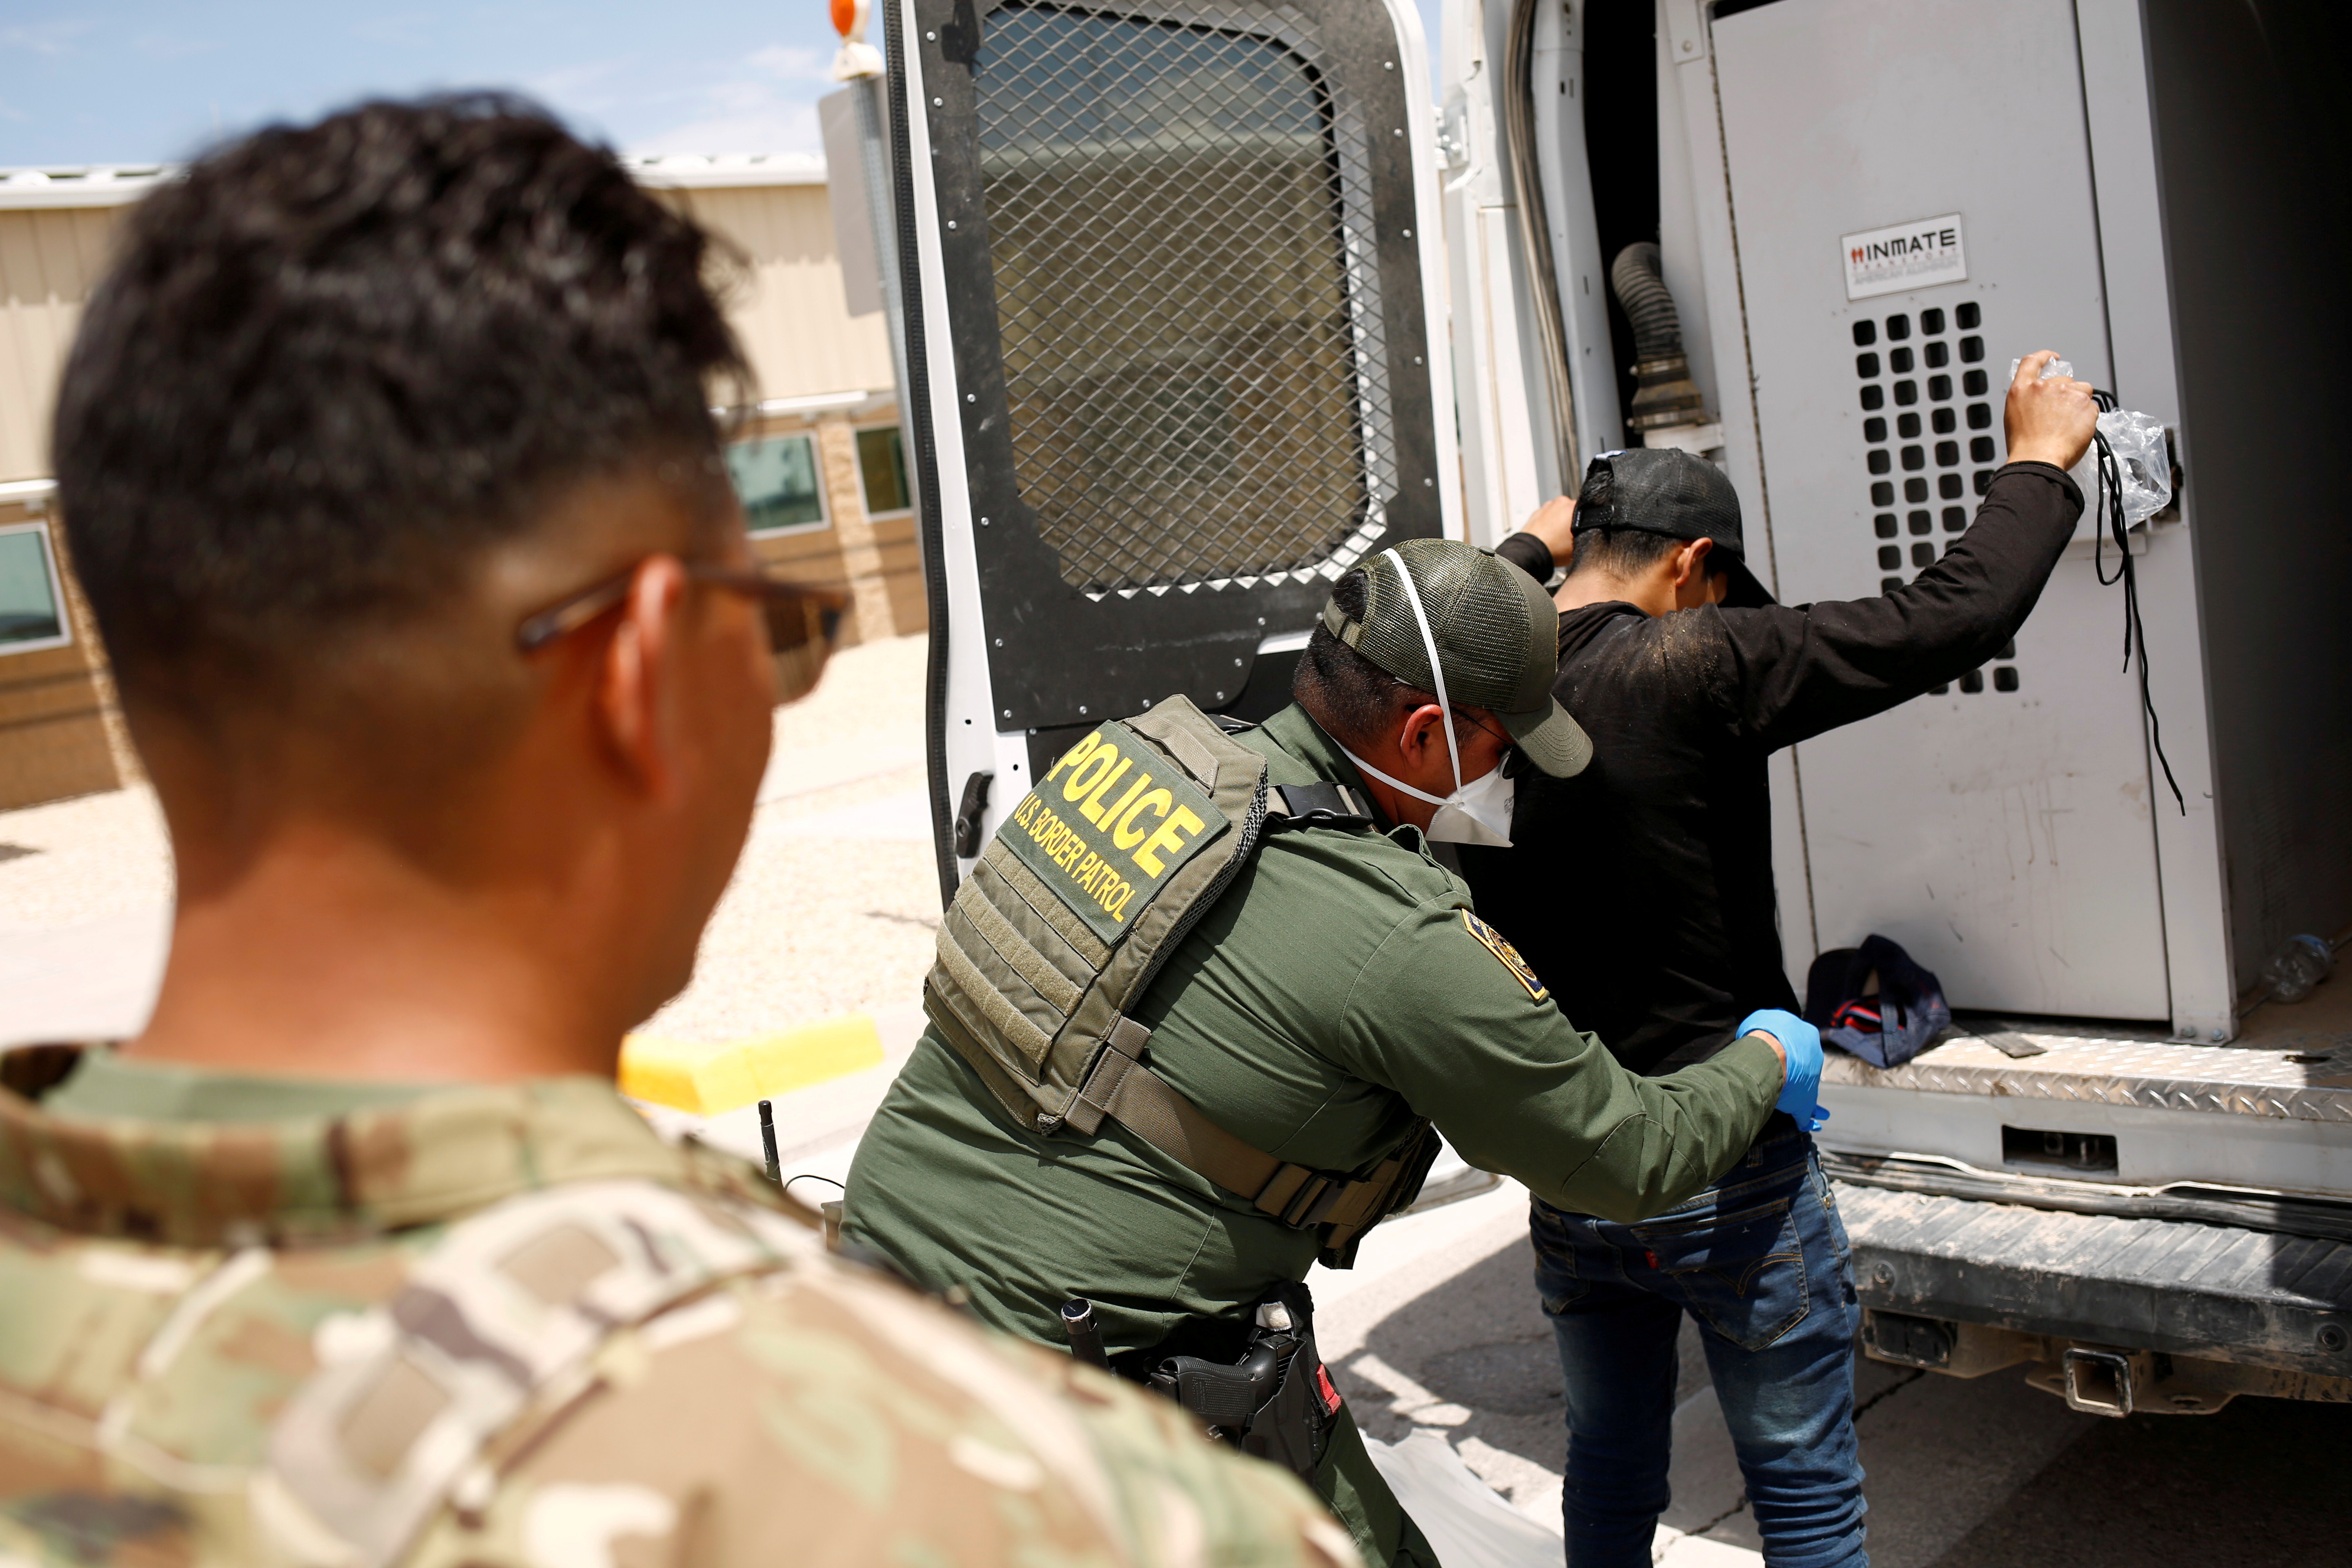 A member of the Border Patrol's Search, Trauma, and Rescue Unit (BORSTAR) observes a migrant from Central America who was detained by U.S. Customs and Border Protection (CBP) agents after crossing into the United States from Mexico, in Dona Ana County, New Mexico, U.S., July 15, 2021. REUTERS/Jose Luis Gonzalez